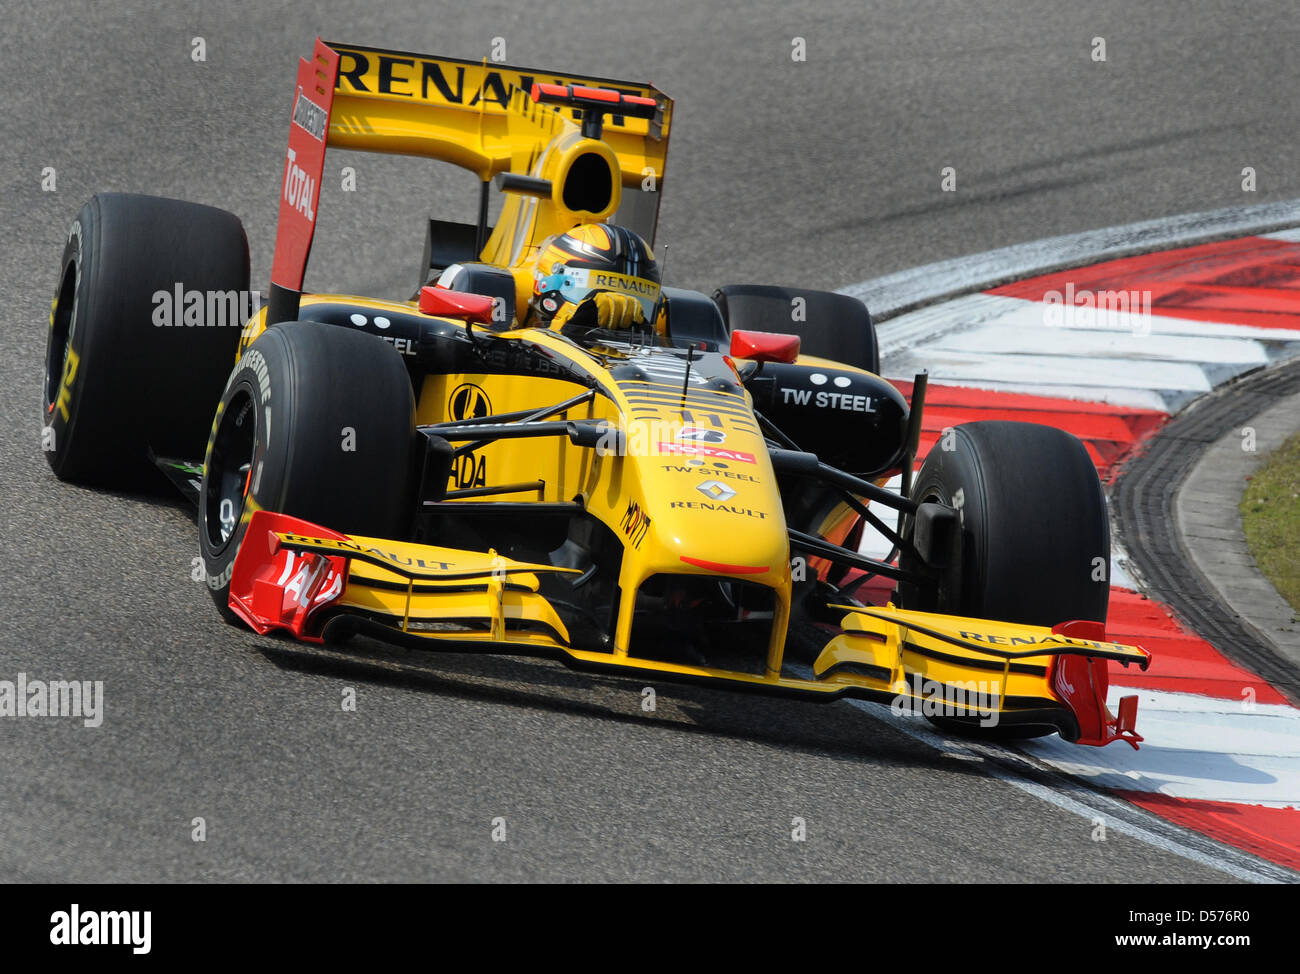 Polish Formula One driver Robert Kubica of Renault steers his race car during the qualification at Shanghai International Circuit in Shanghai, China, 17 April 2010. The Formula One Grand Prix of China took place on 18 April 2010. Photo: Peter Steffen Stock Photo